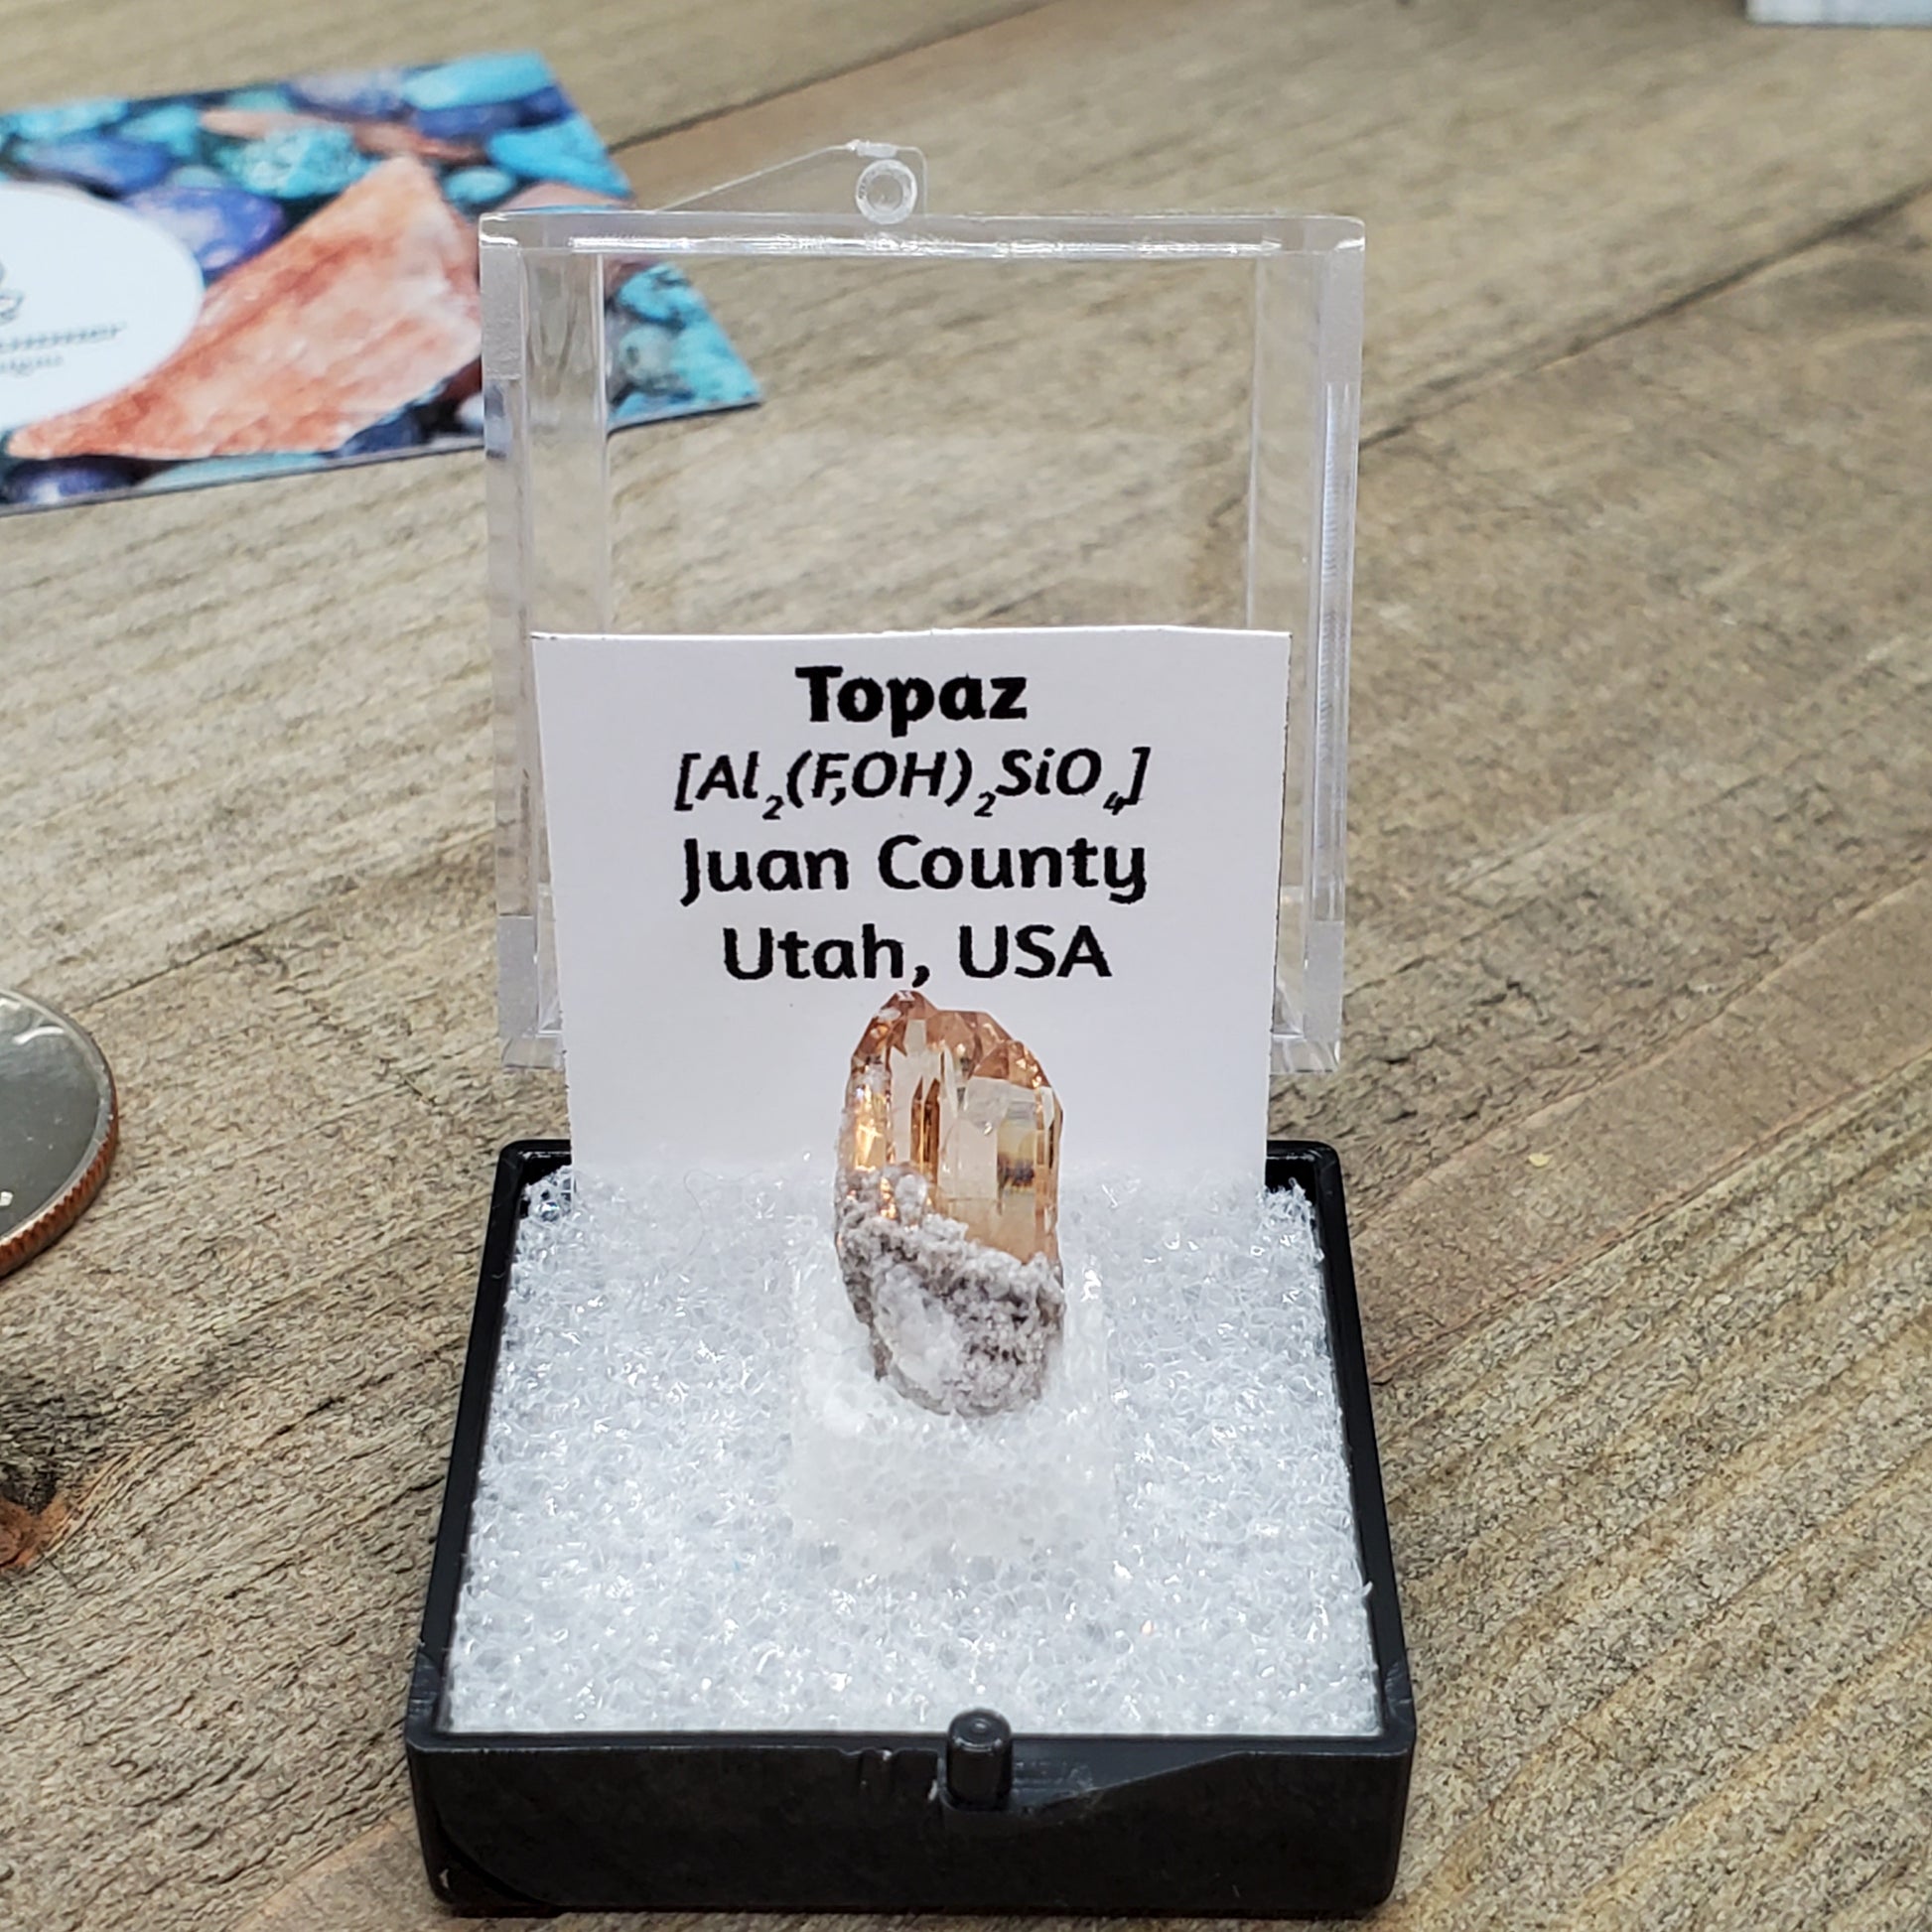 Peach colored topaz crystal in box with formula and origin label.